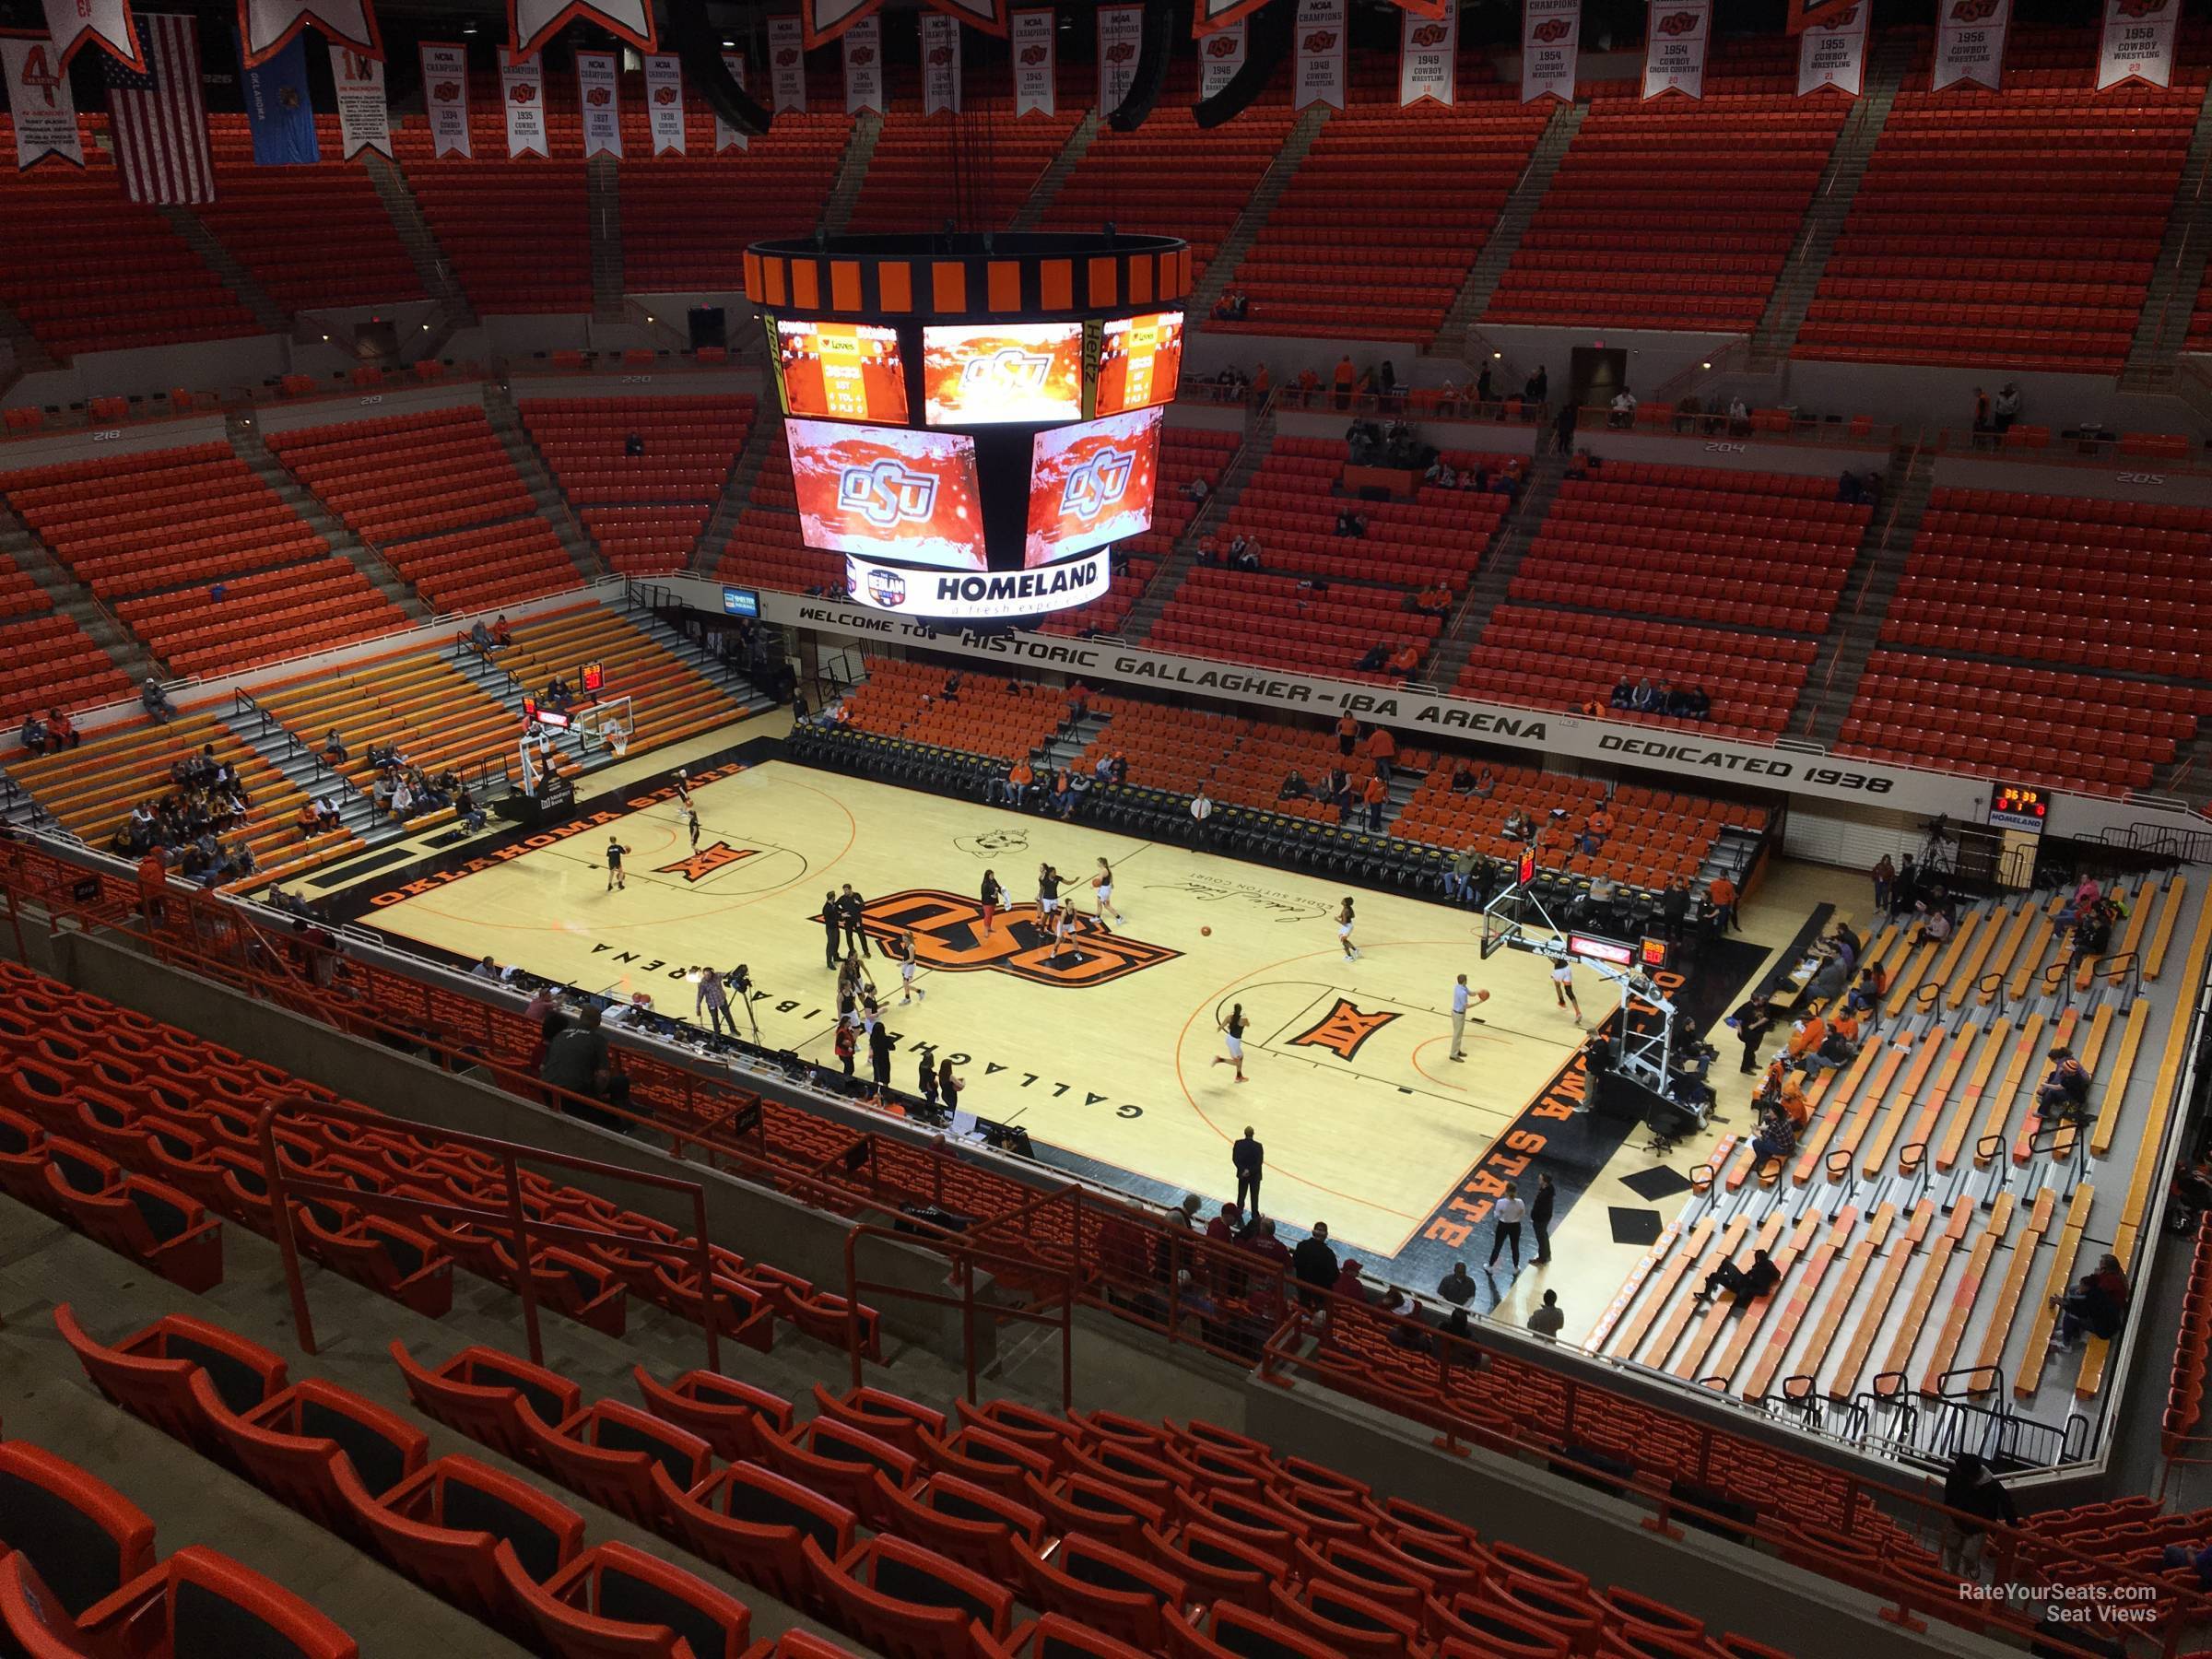 section 315, row 10 seat view  - gallagher-iba arena